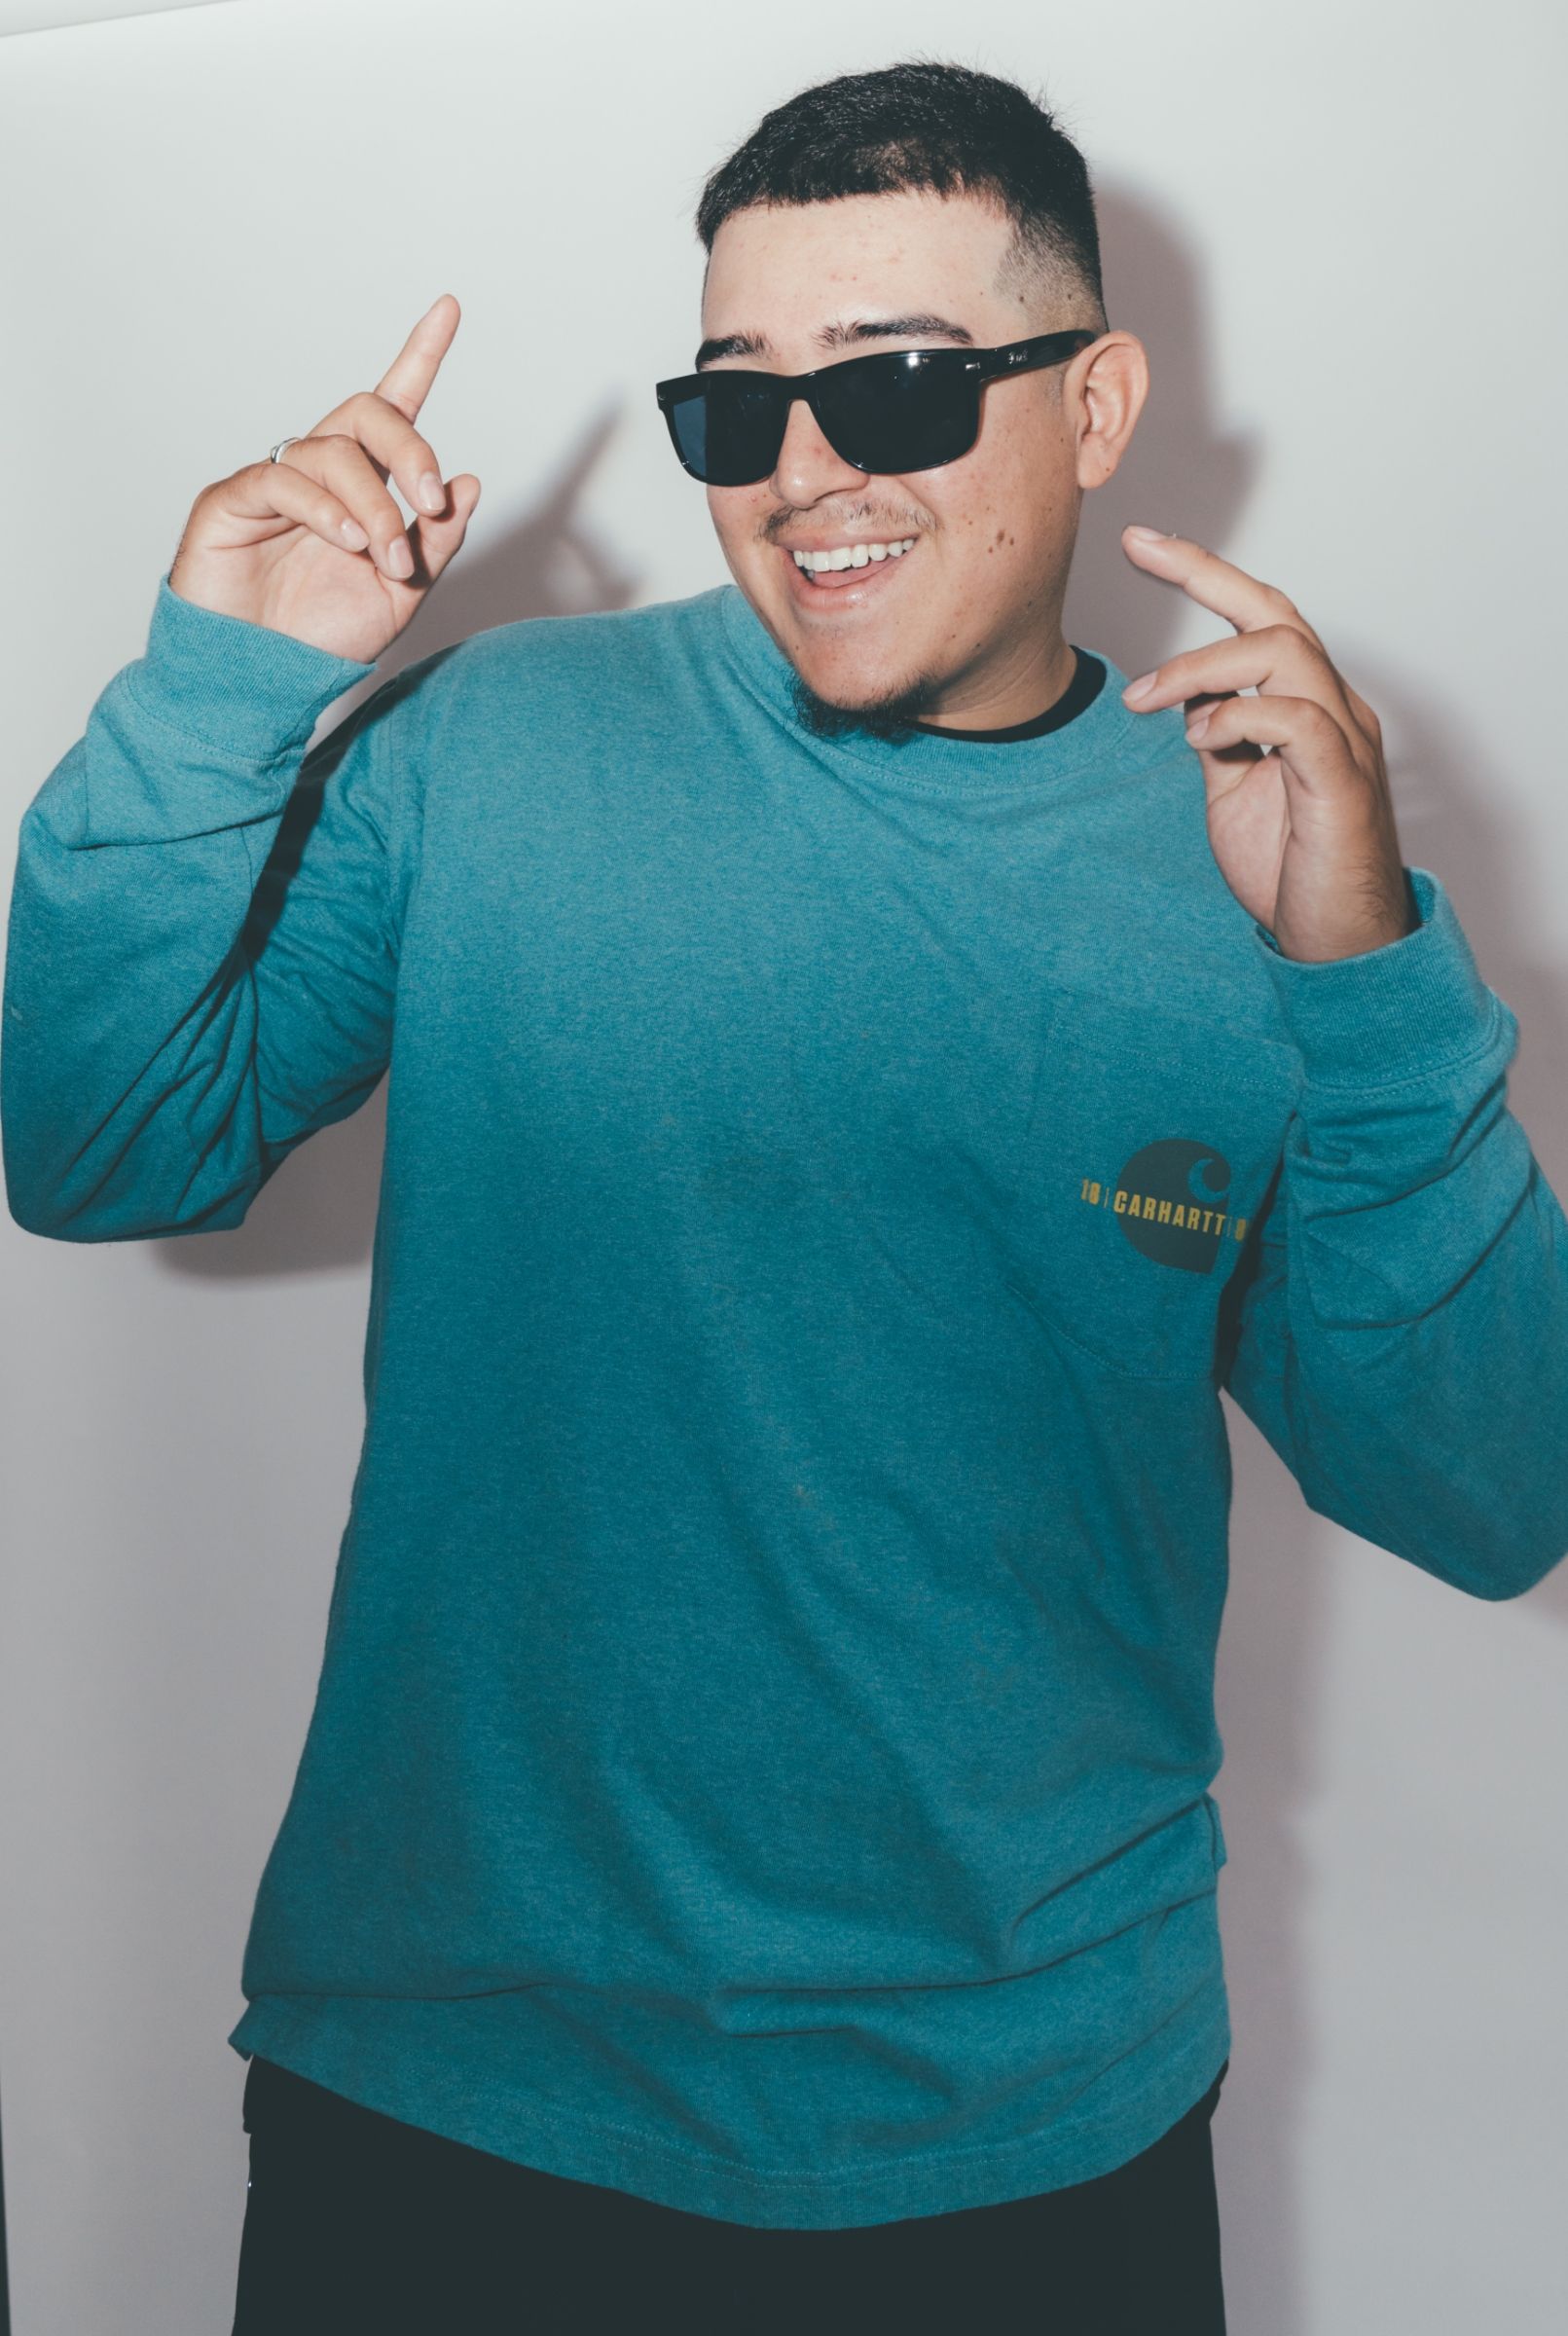 A smiling man wearing sunglasses and a blue Carhartt sweatshirt, dancing and pointing upwards with his fingers.